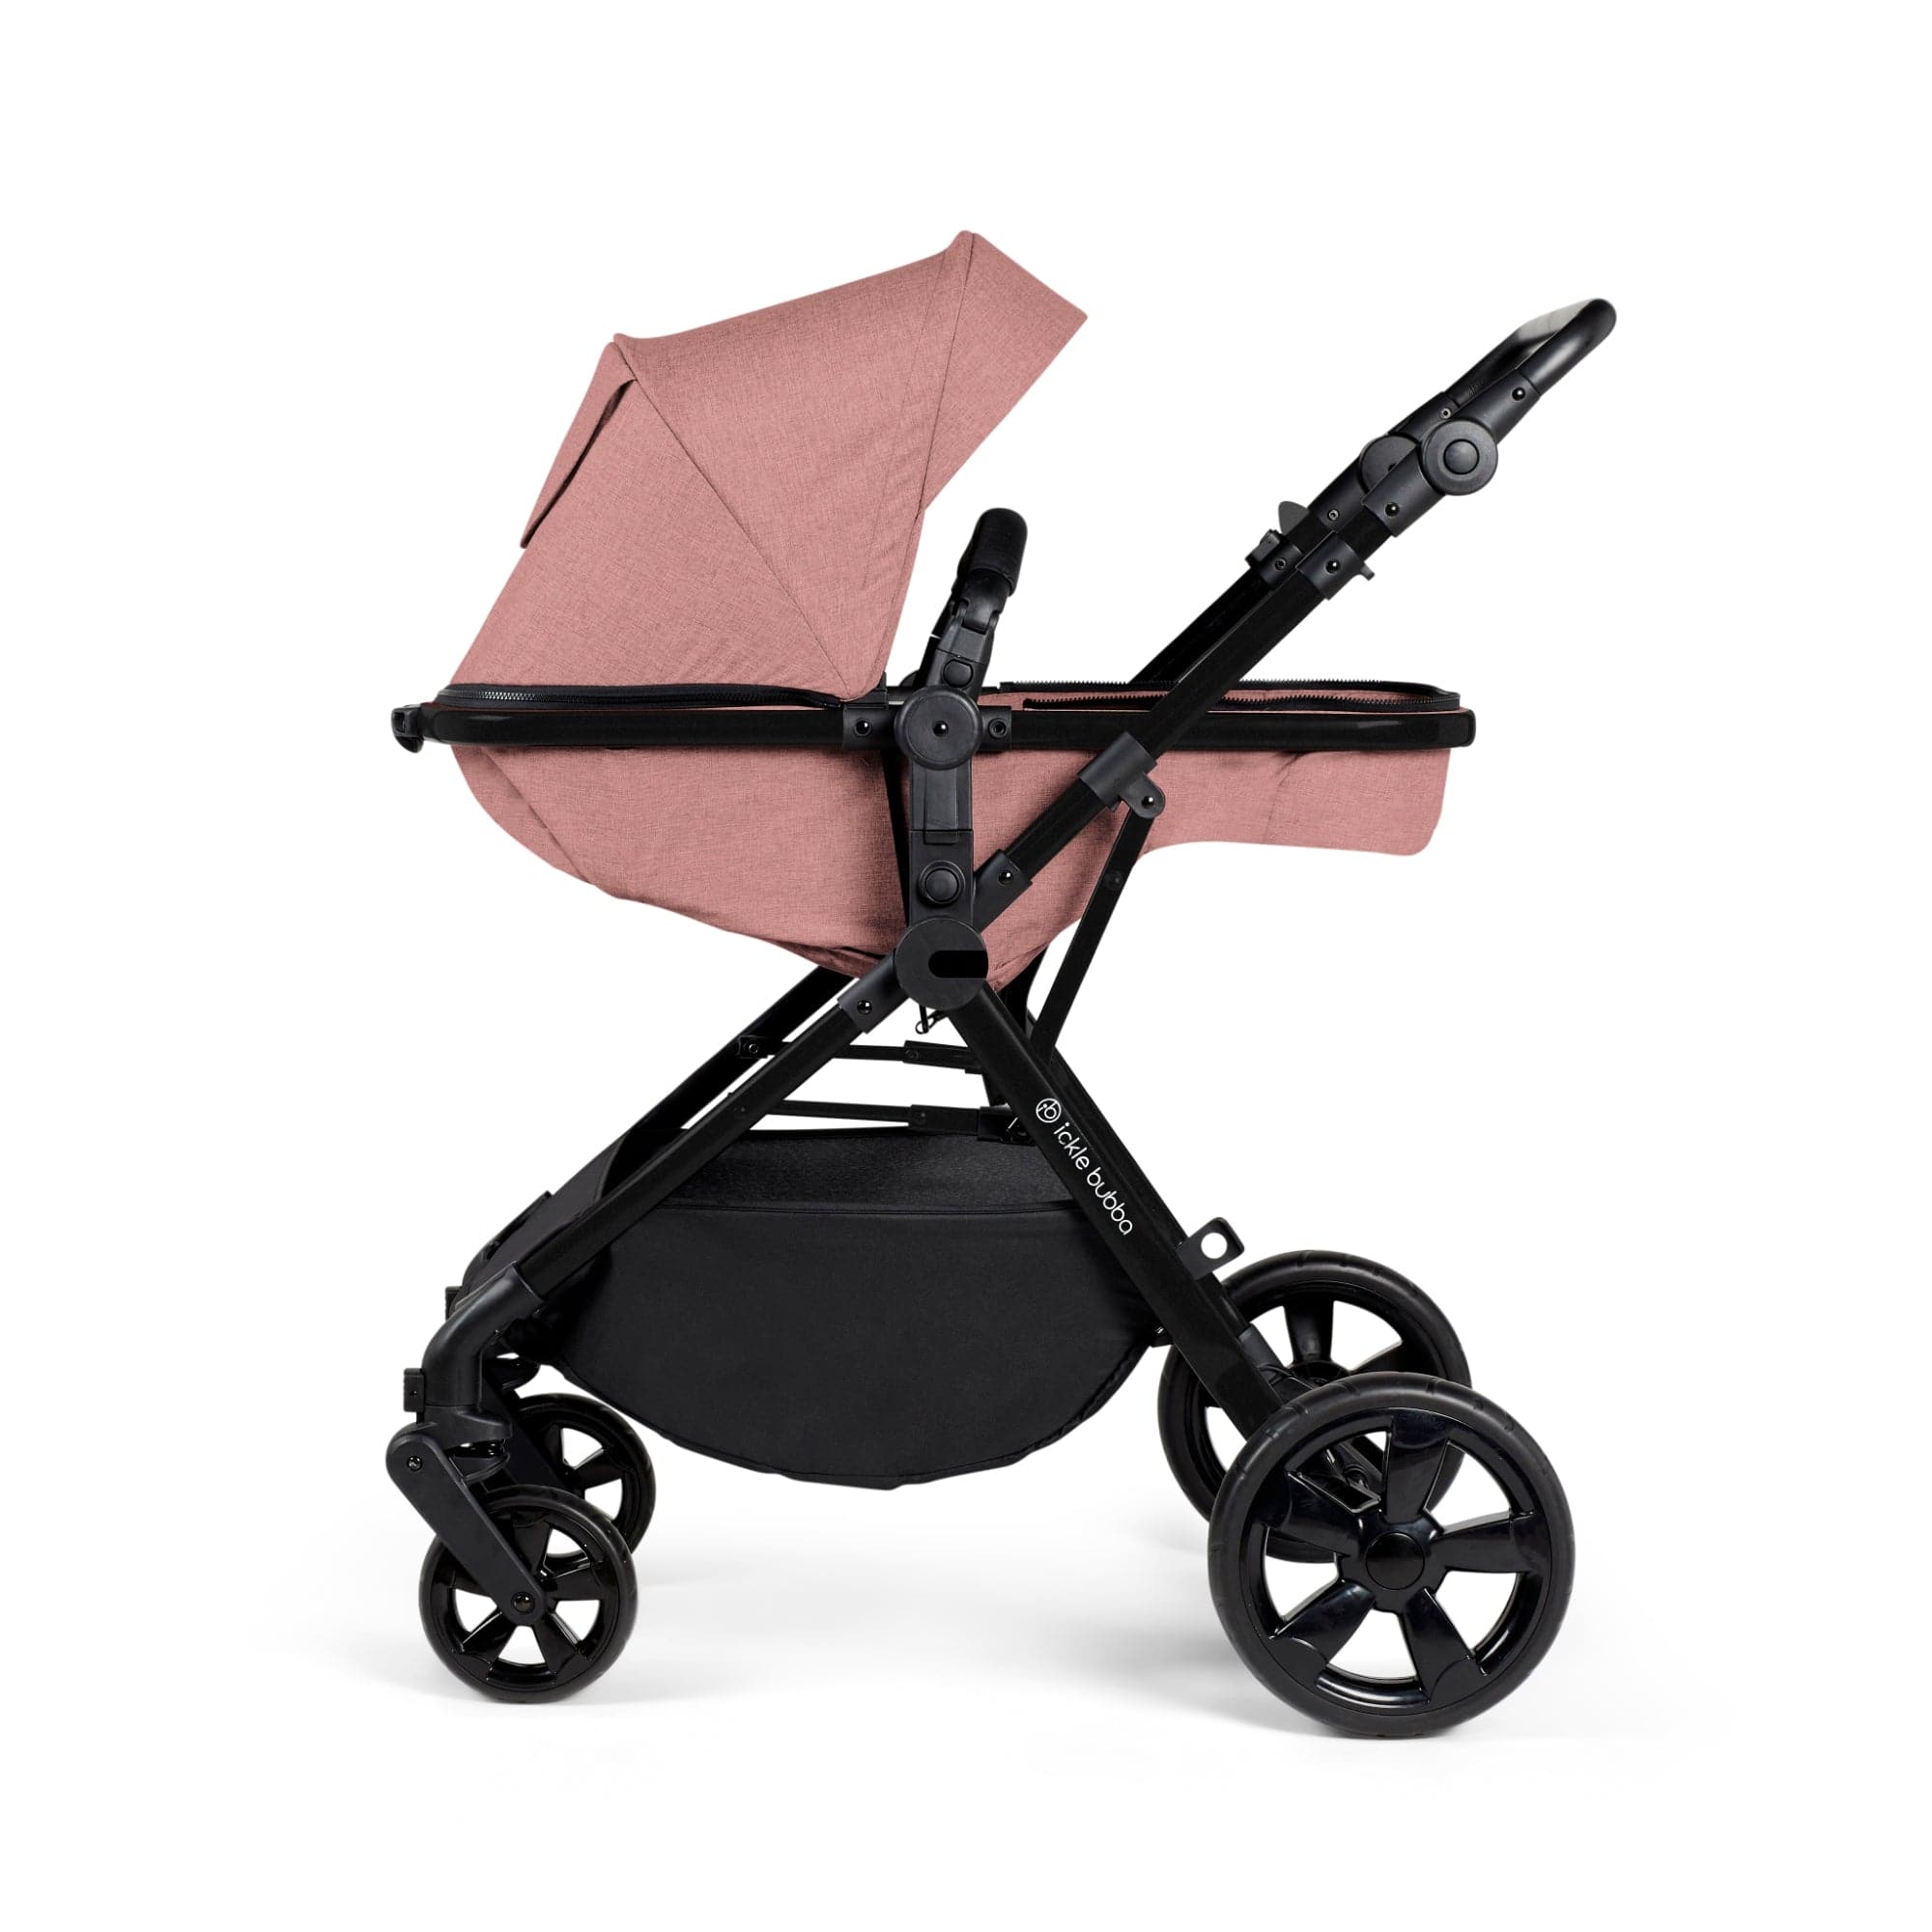 Ickle Bubba Comet I-Size Travel System With Stratus Car Seat & Isofix Base- Dusky Pink - For Your Little One